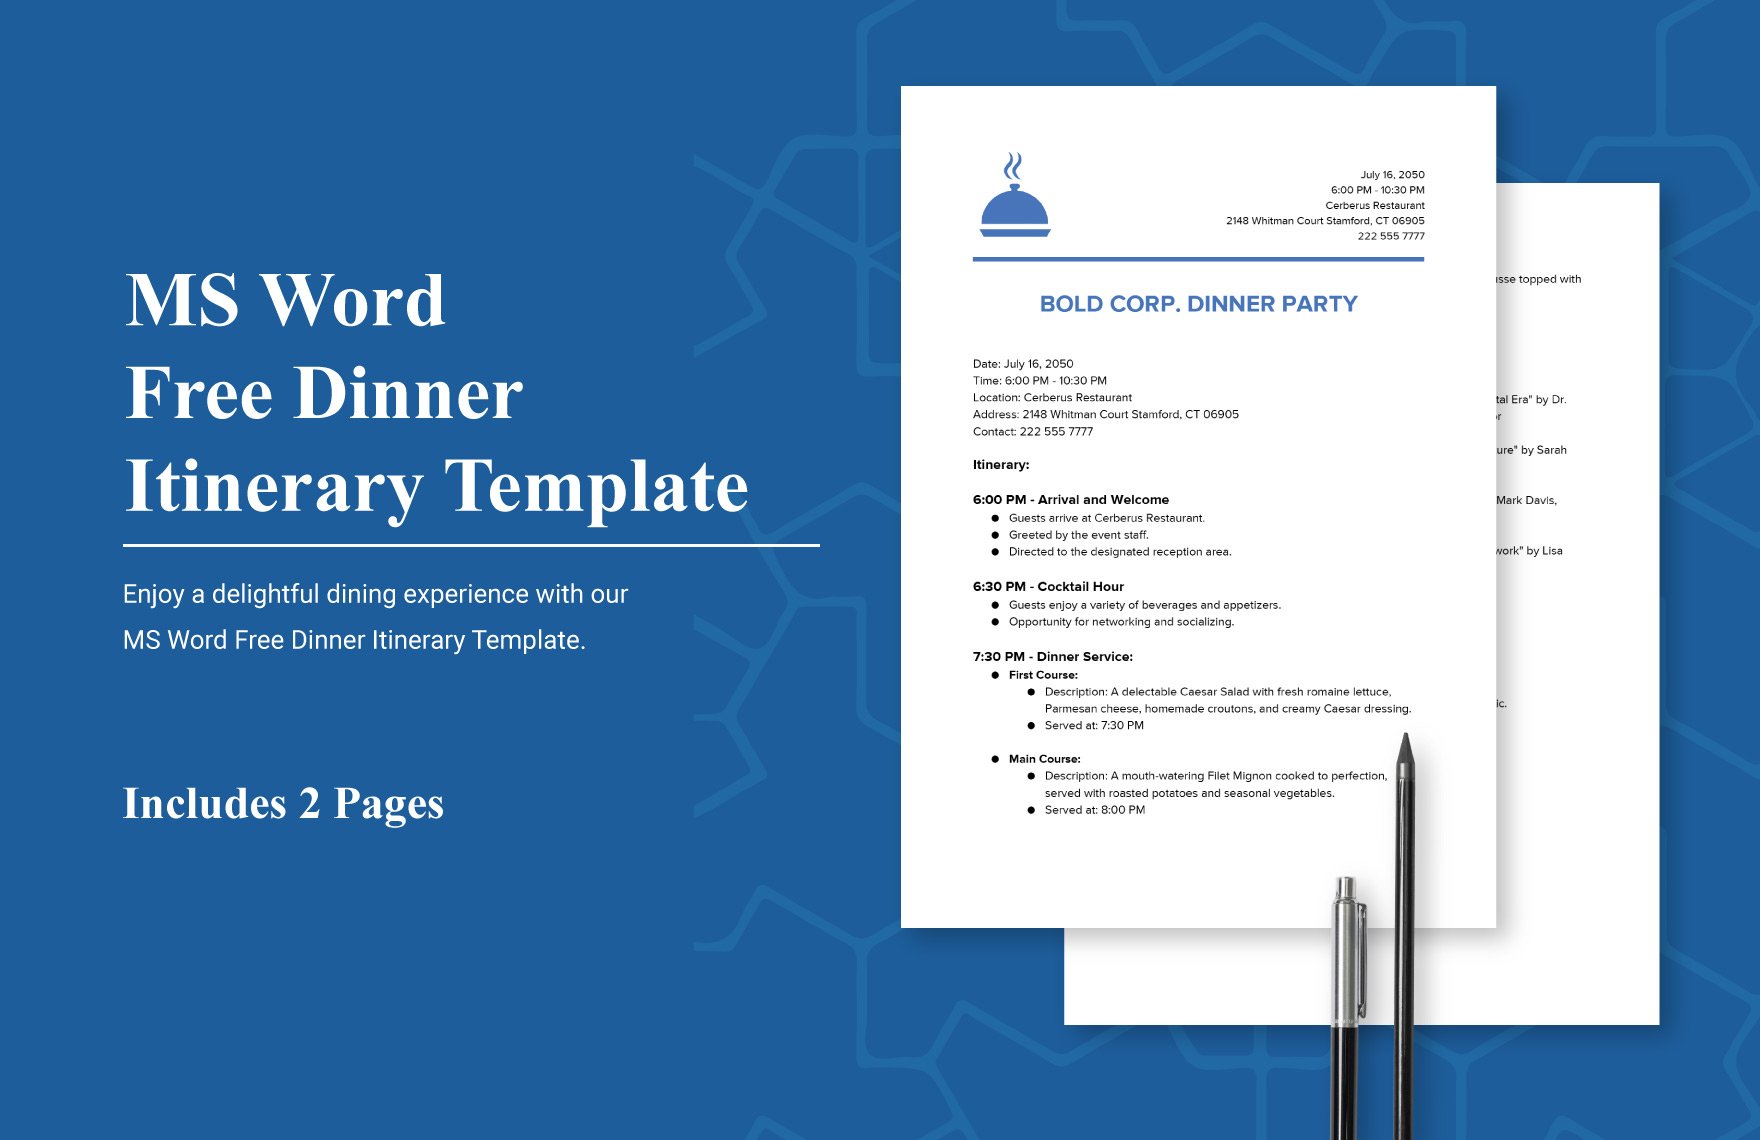 MS Word Free Dinner Itinerary Template